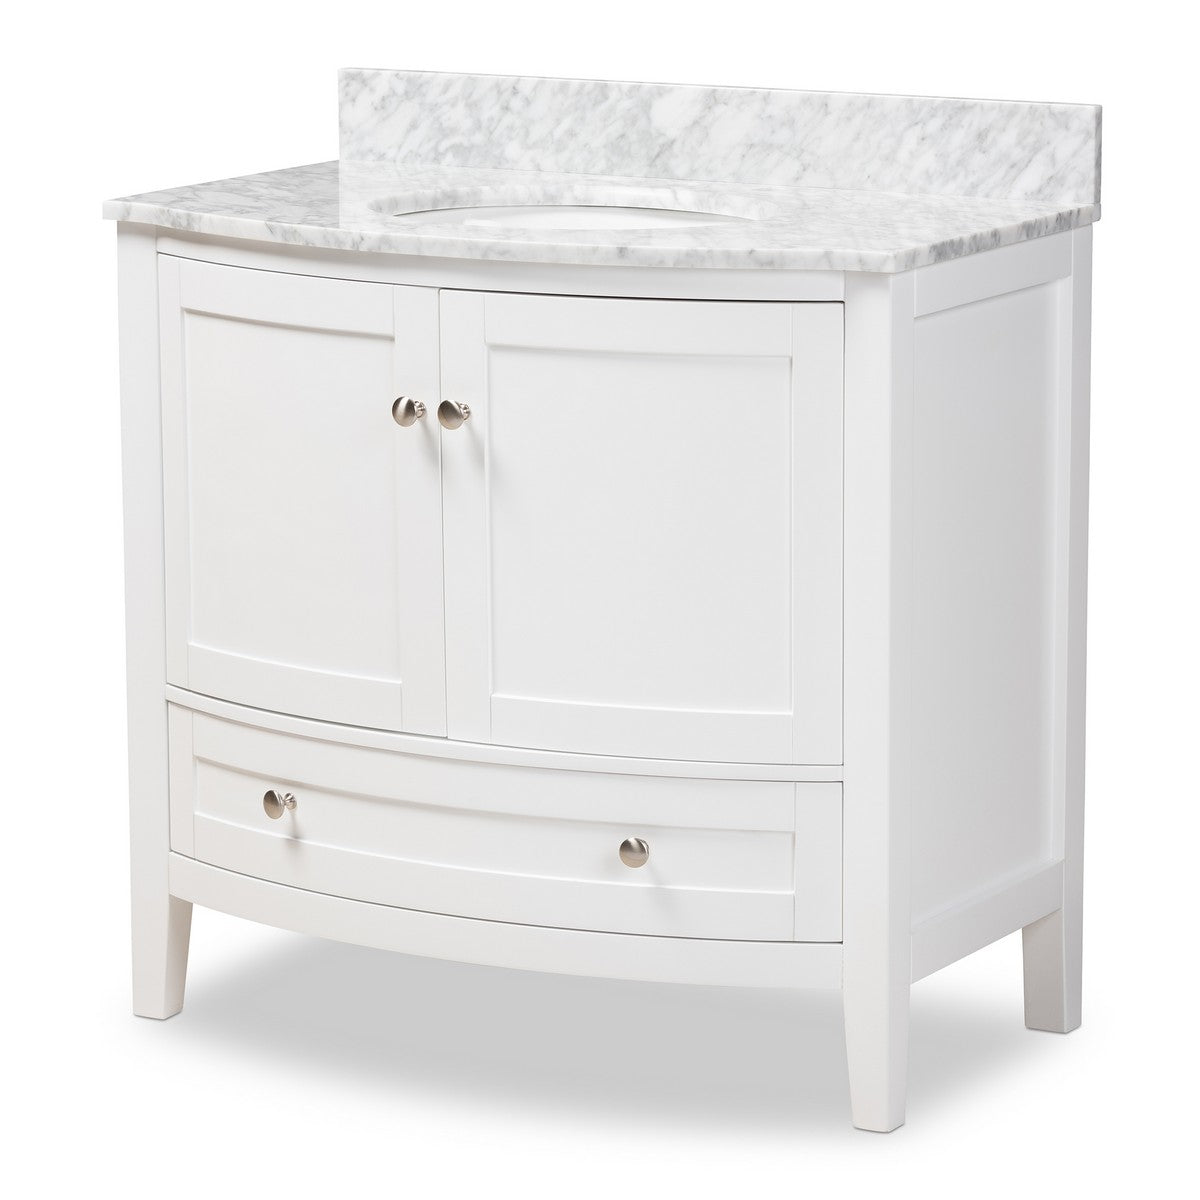 Baxton Studio Nicole 36-Inch Transitional White Finished Wood and Marble Single Sink Bathroom Vanity Baxton Studio-Bathroom Vanities-Minimal And Modern - 1